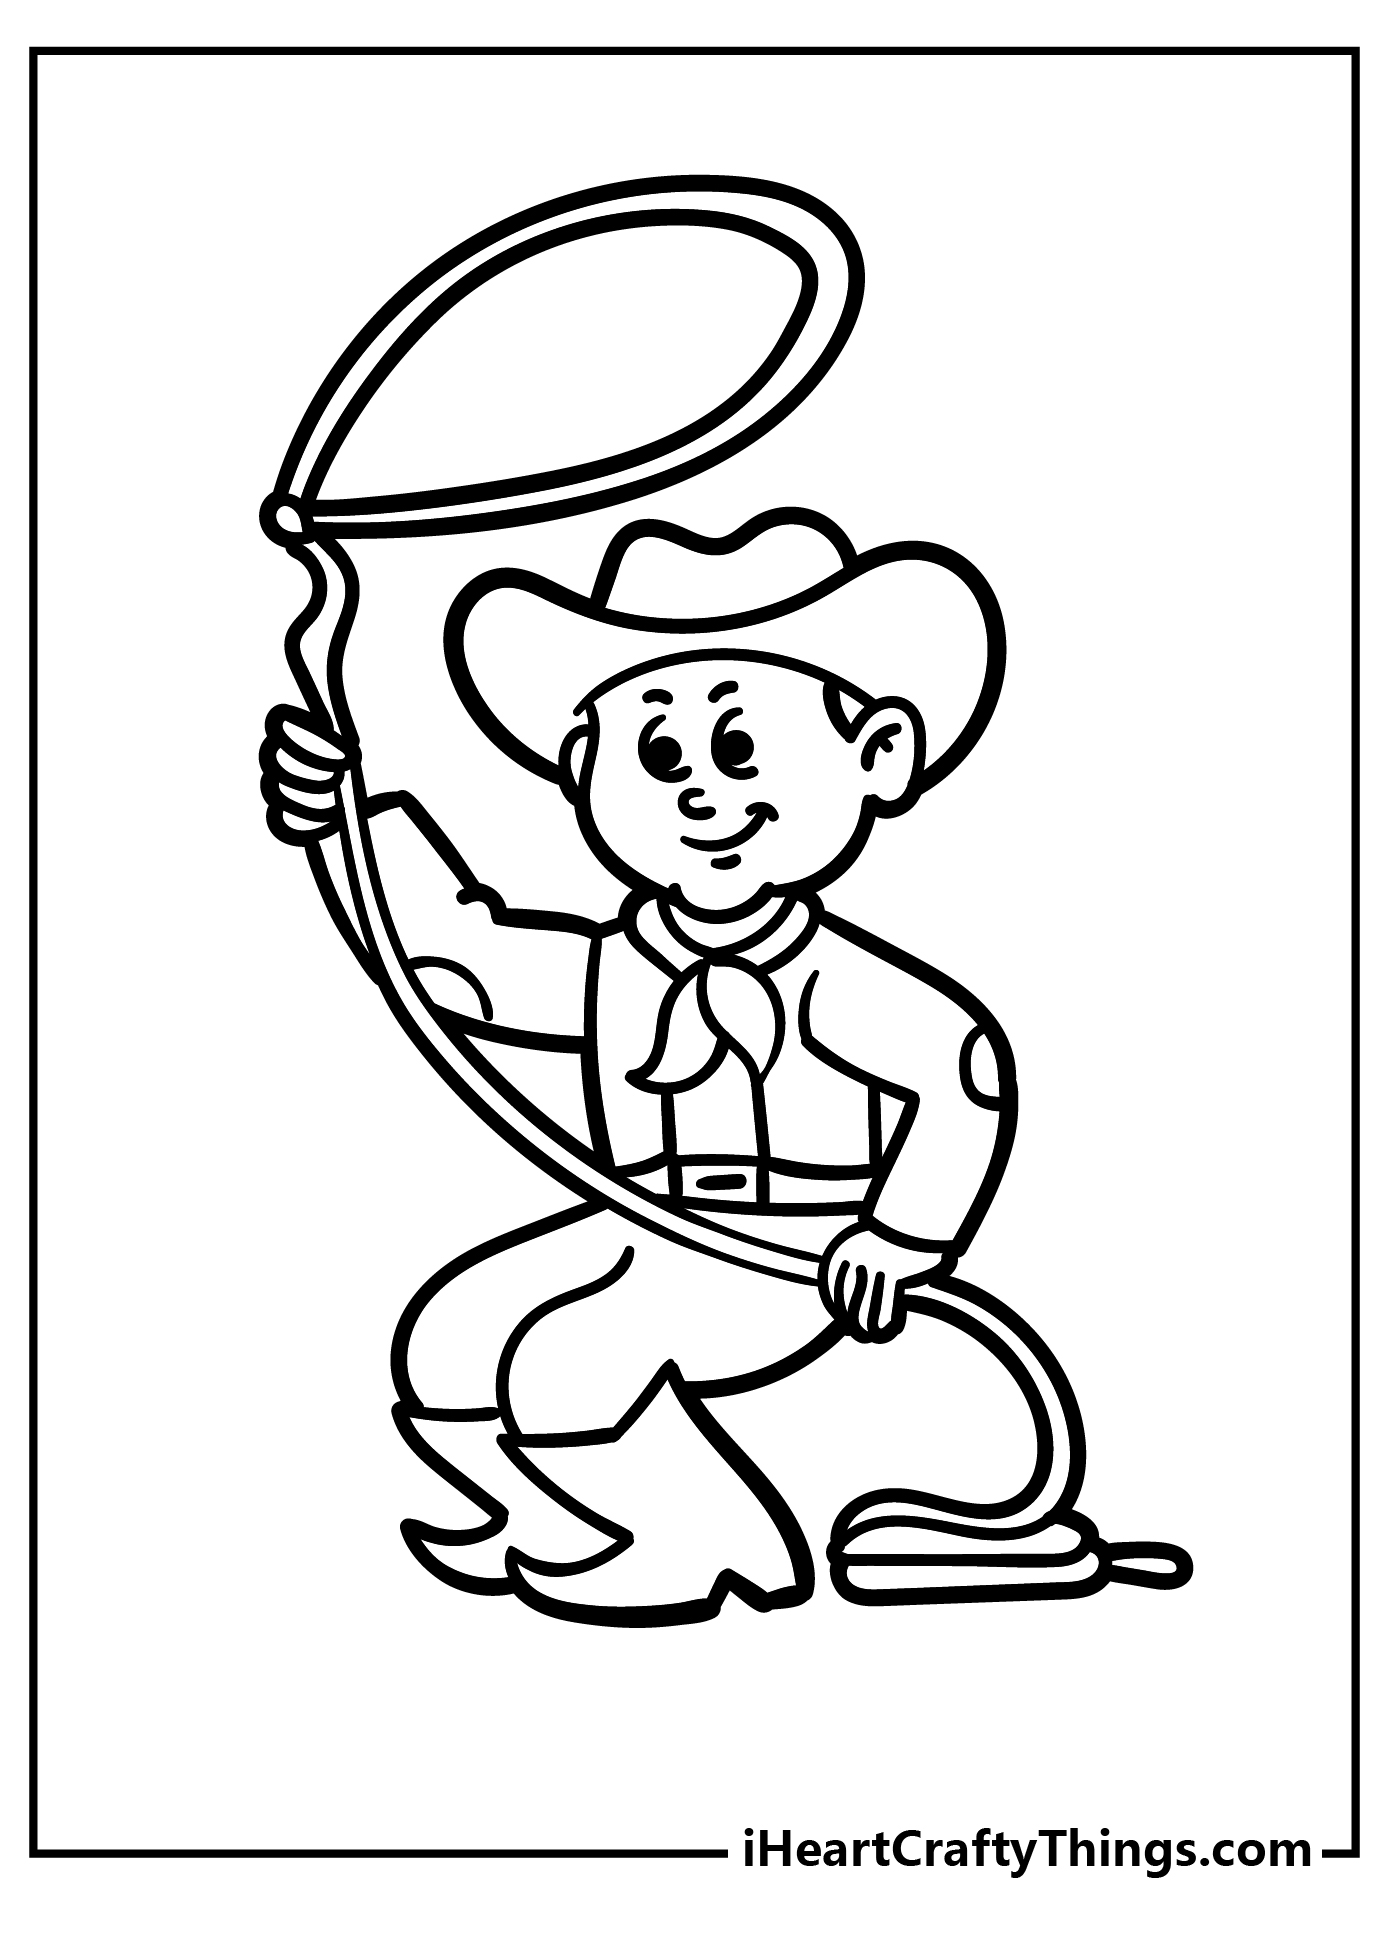 Cowboy Coloring Pages for kids free download